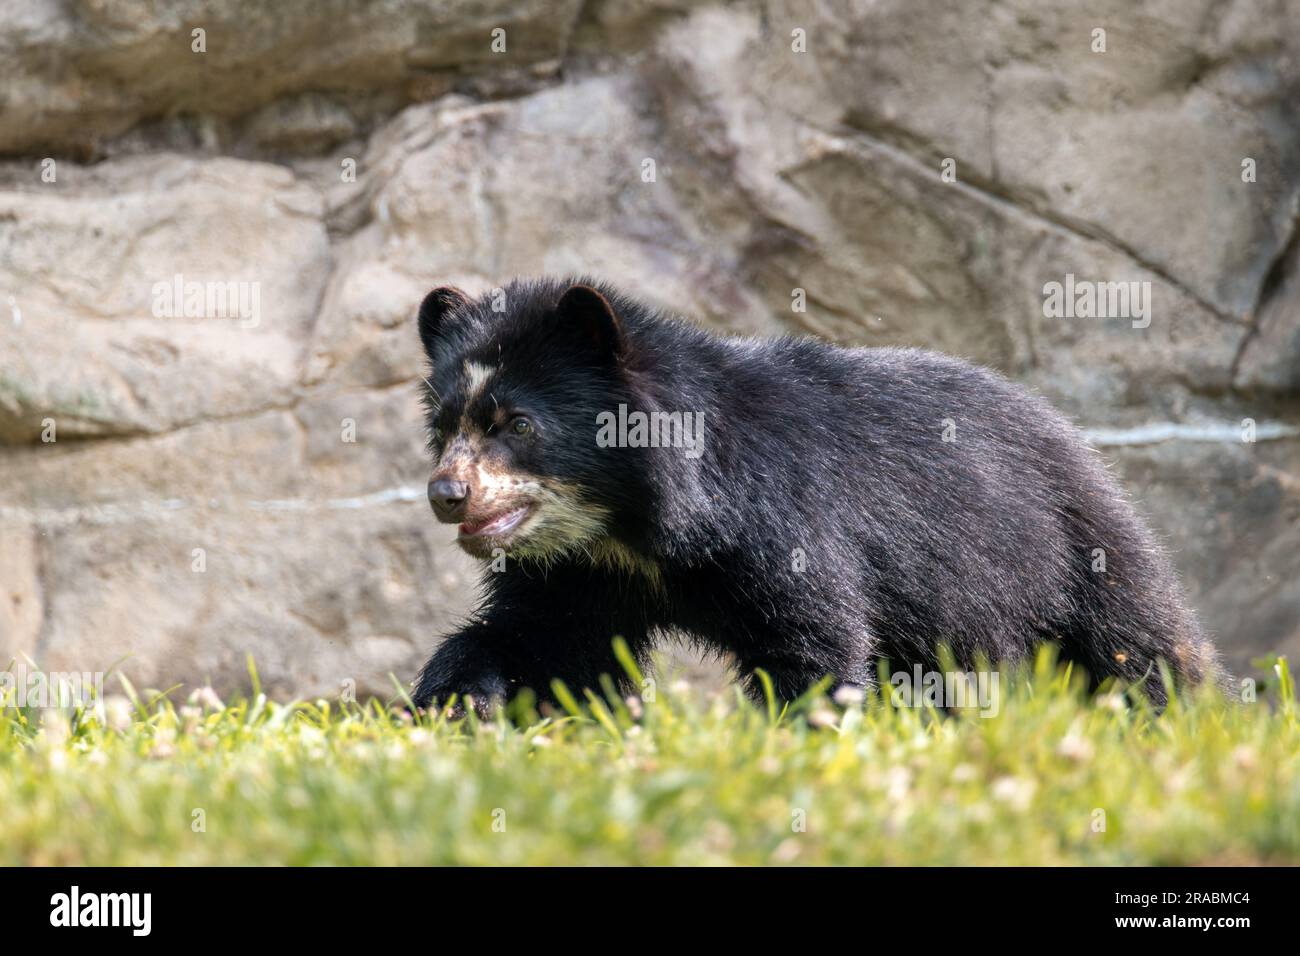 An Andean Cub Bear Walking in the Grass Stock Photo